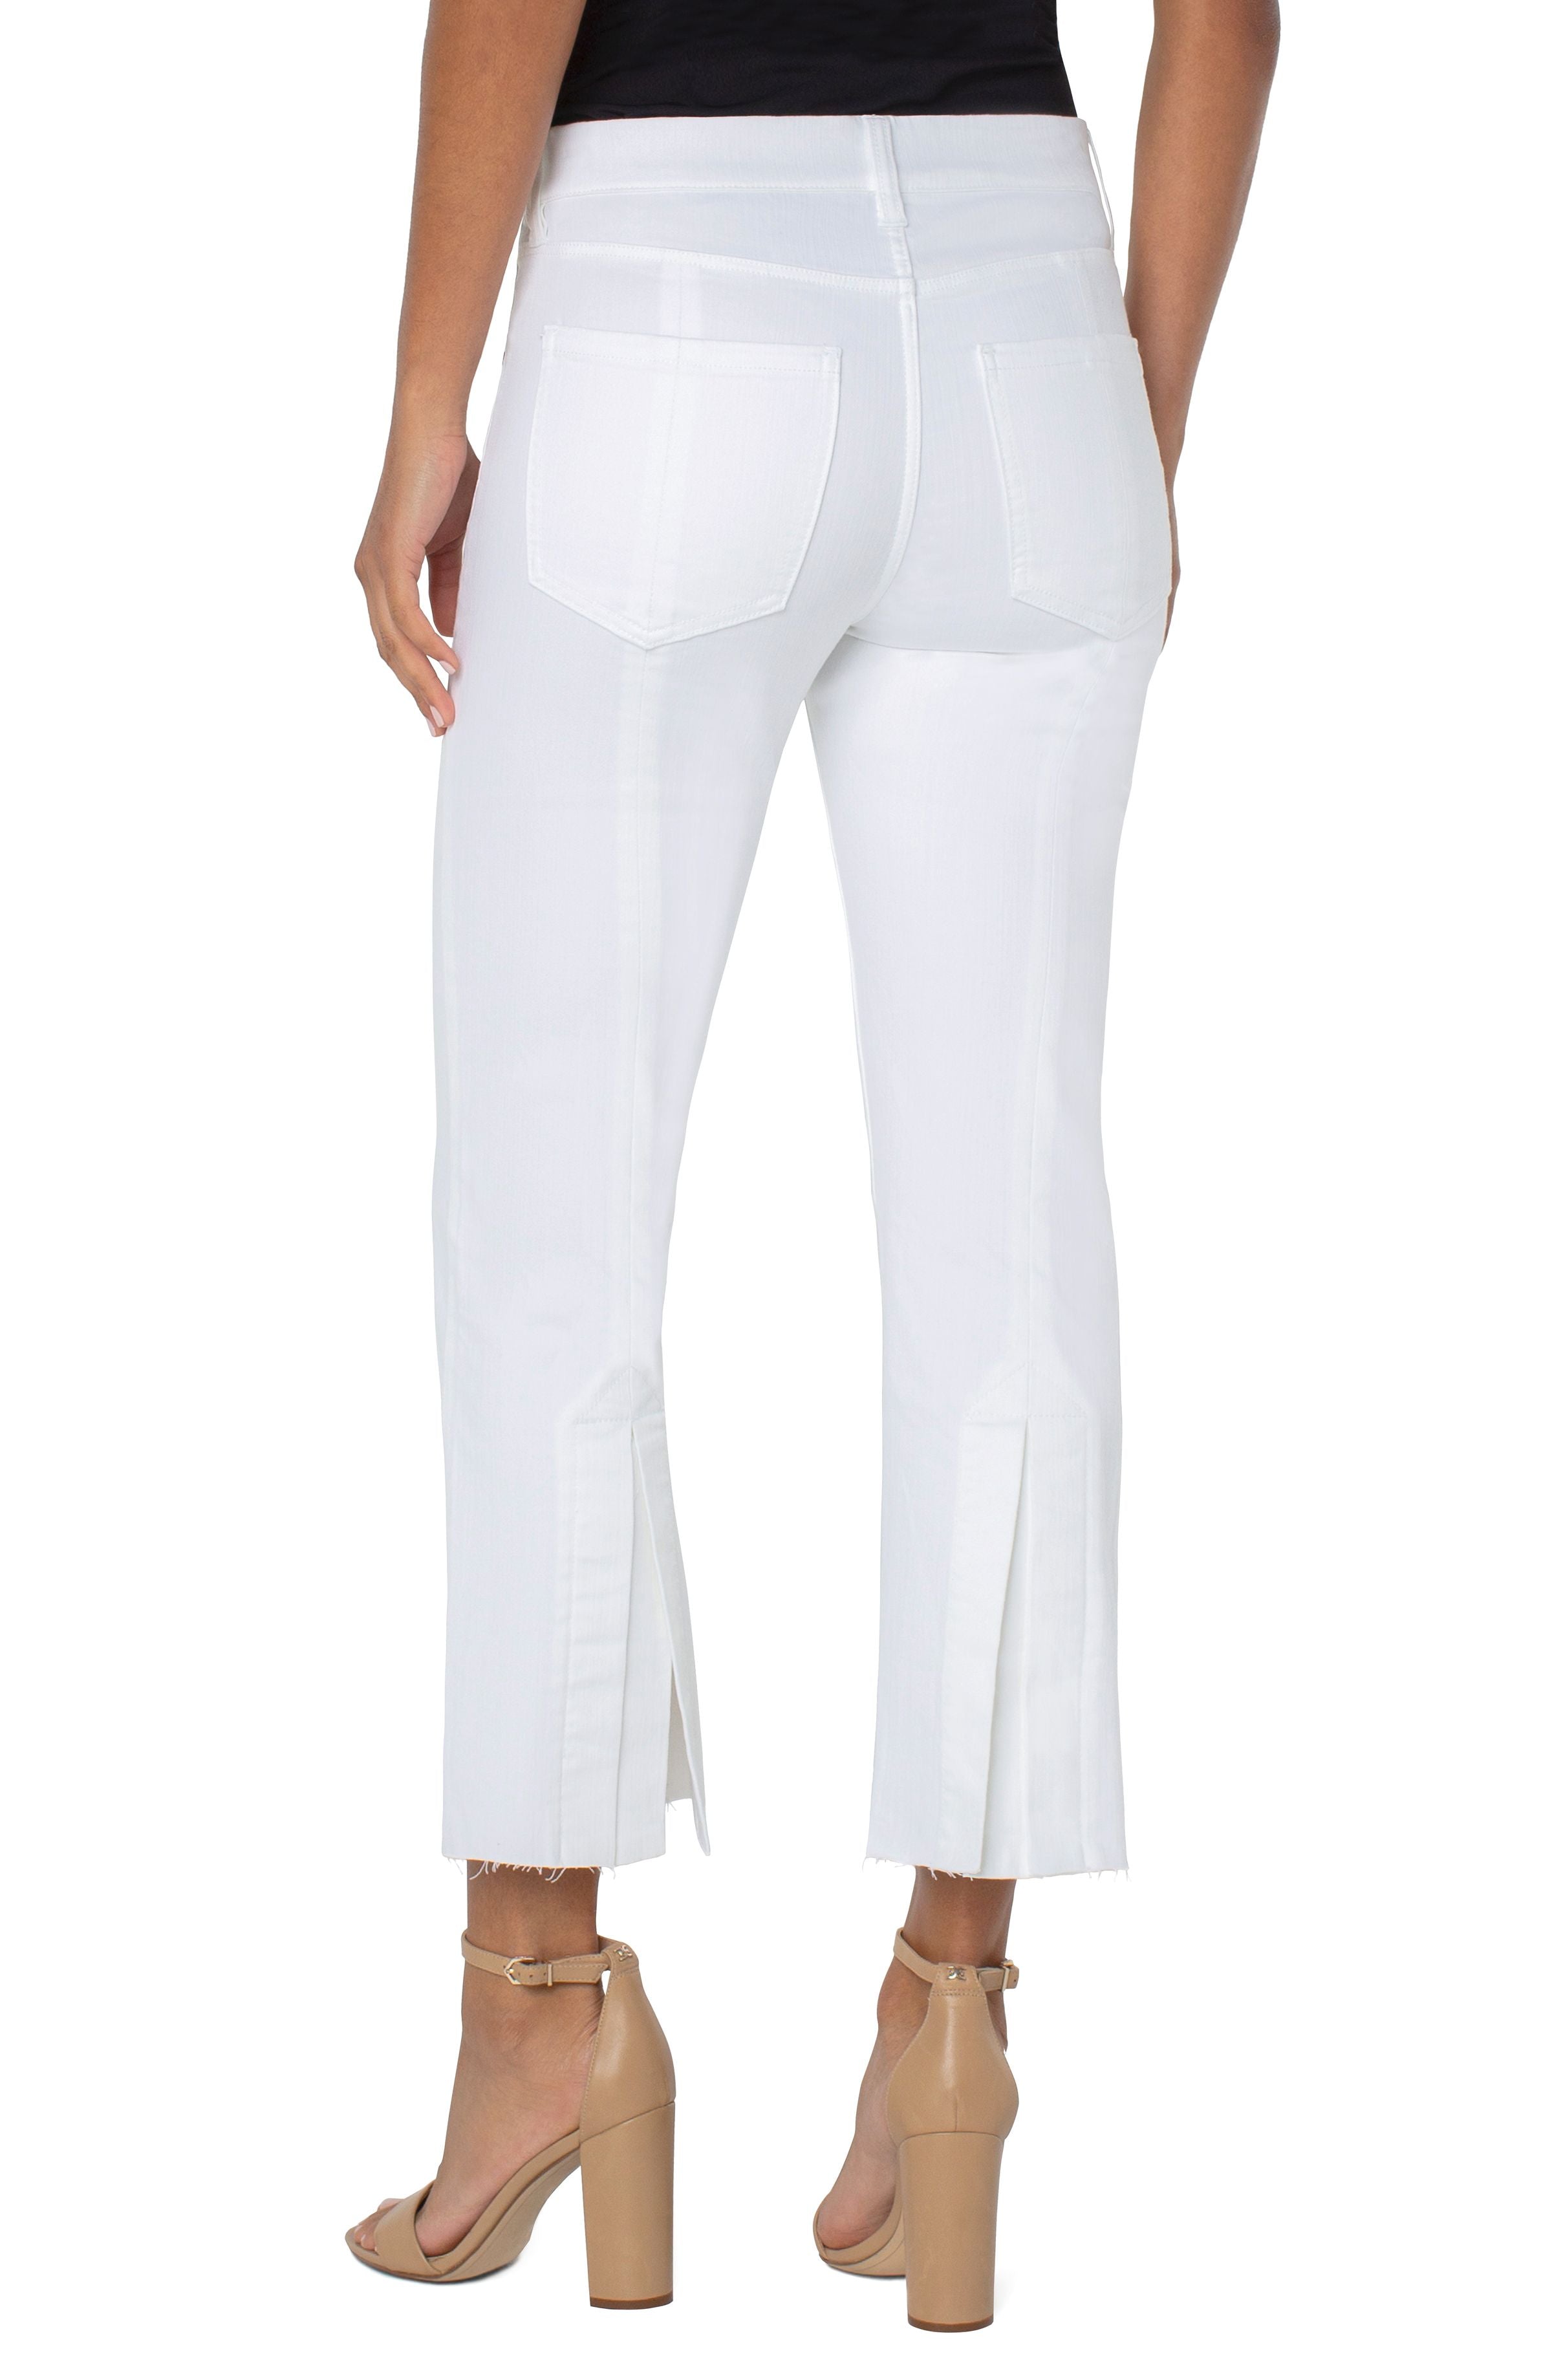 Liverpool Los Angeles Gia Glider Back Slit Crop Flare 25.5", Bright White - Statement Boutique